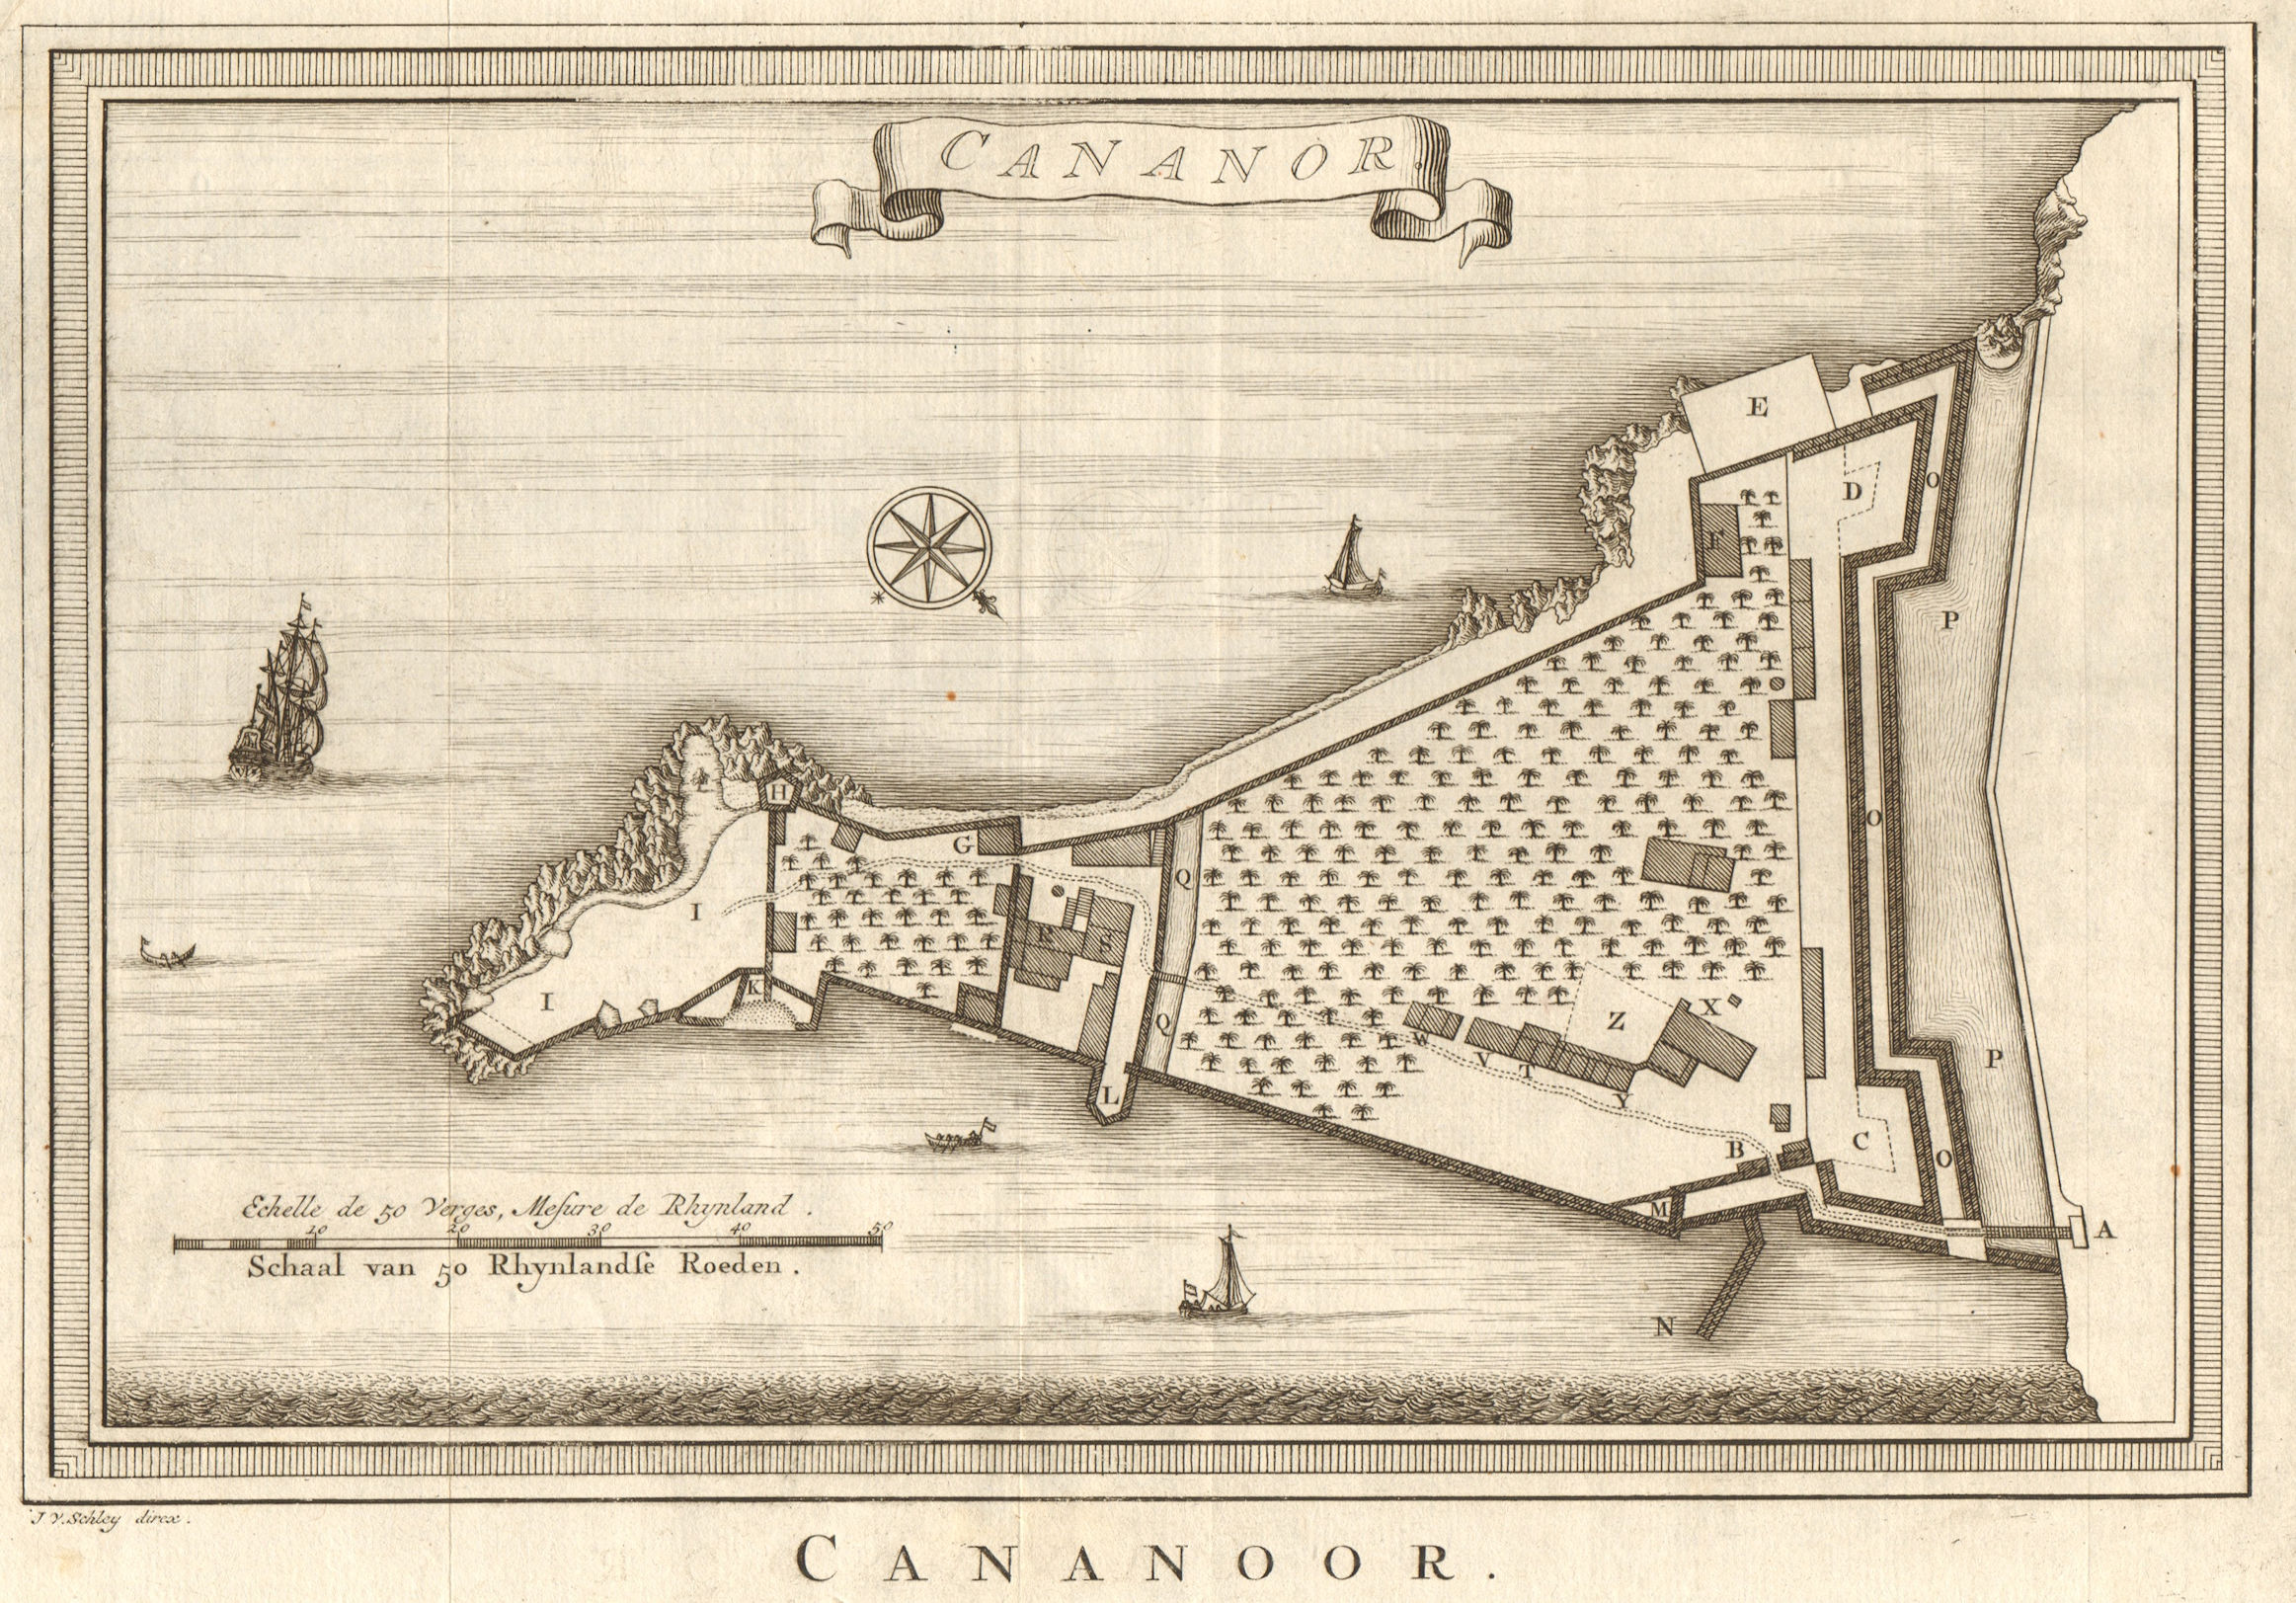 Associate Product 'Cananor'. India. Kannur town city plan, Kerala. BELLIN / SCHLEY 1755 old map